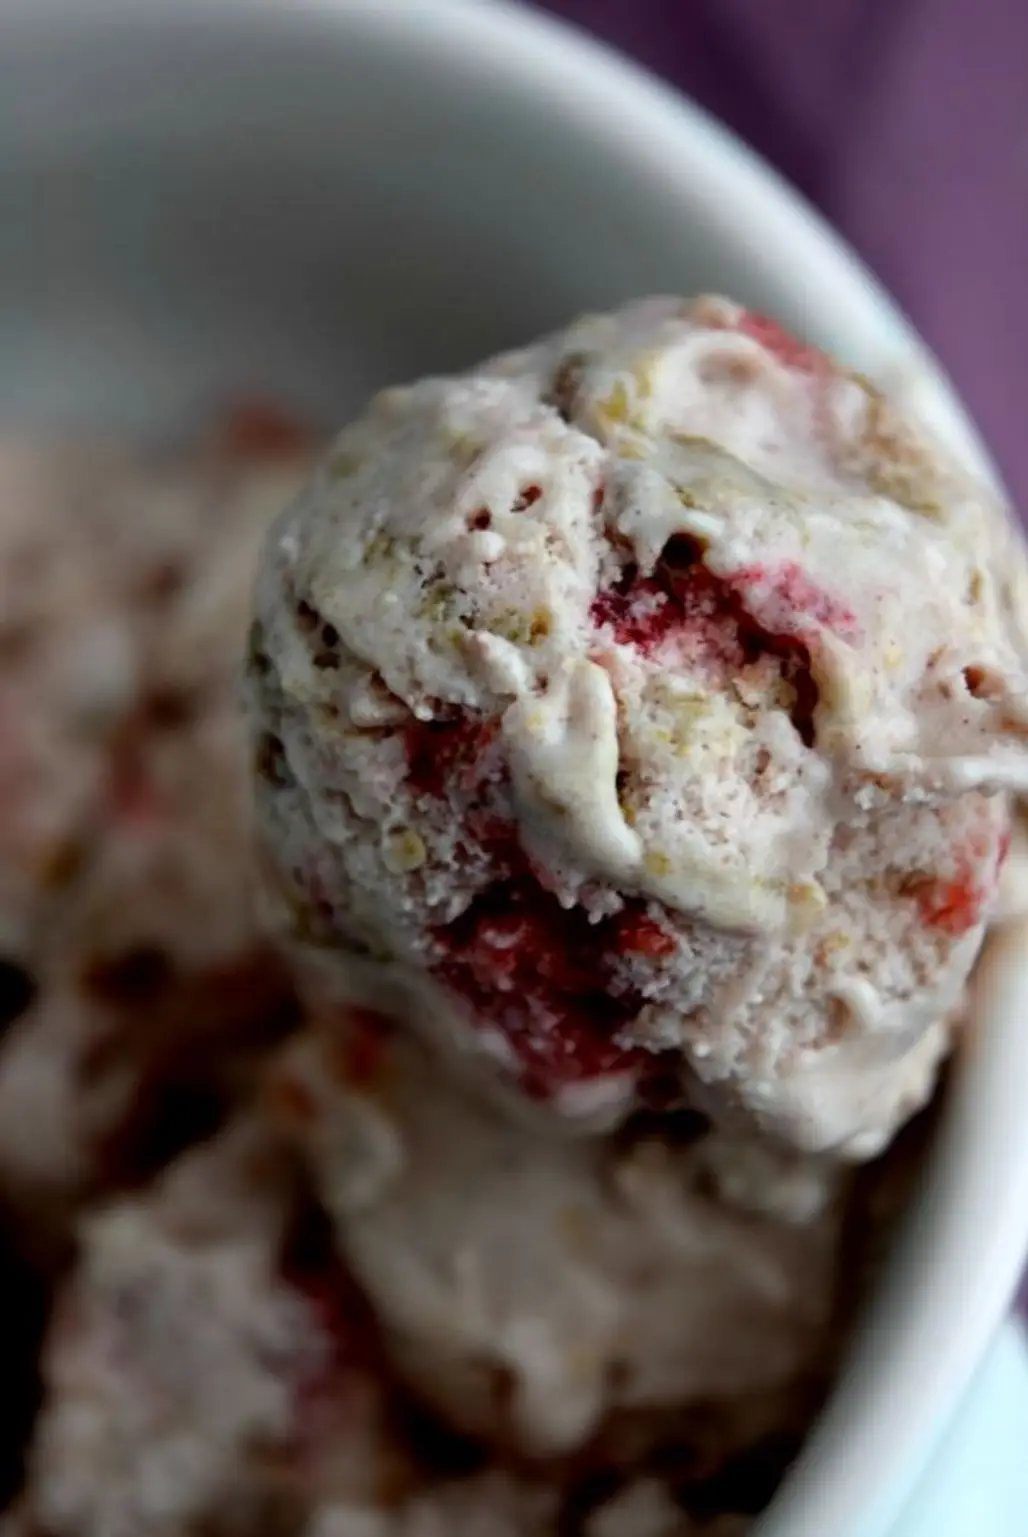 Dairy-Free, Nut-Free Peanut Butter and Jelly Ice Cream